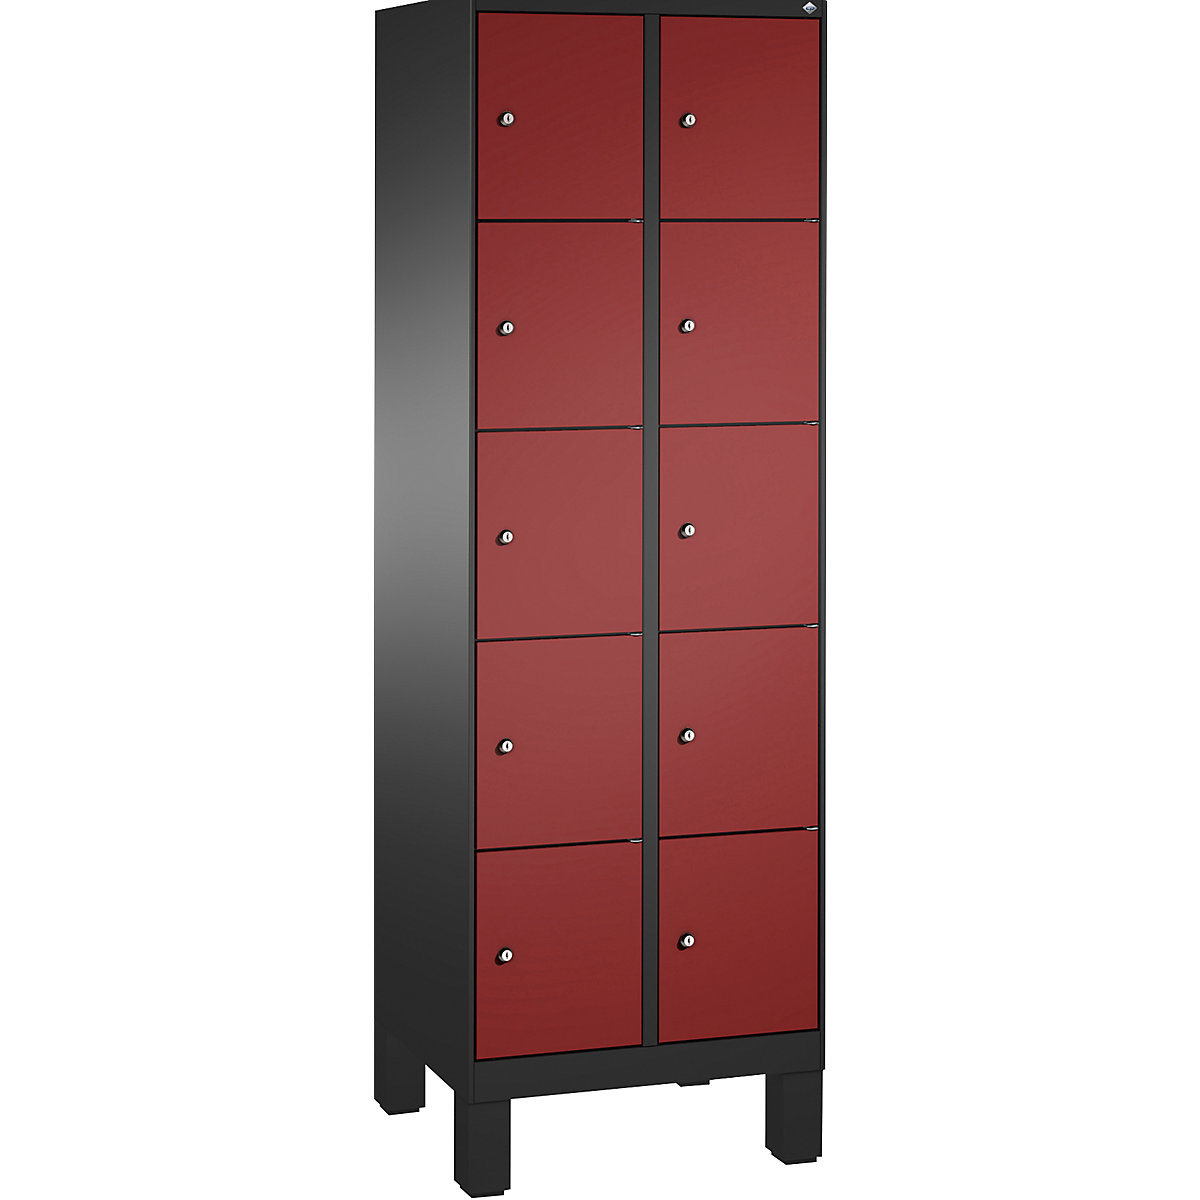 EVOLO locker unit, with feet – C+P, 2 compartments, 5 shelf compartments each, compartment width 300 mm, black grey / ruby red-14